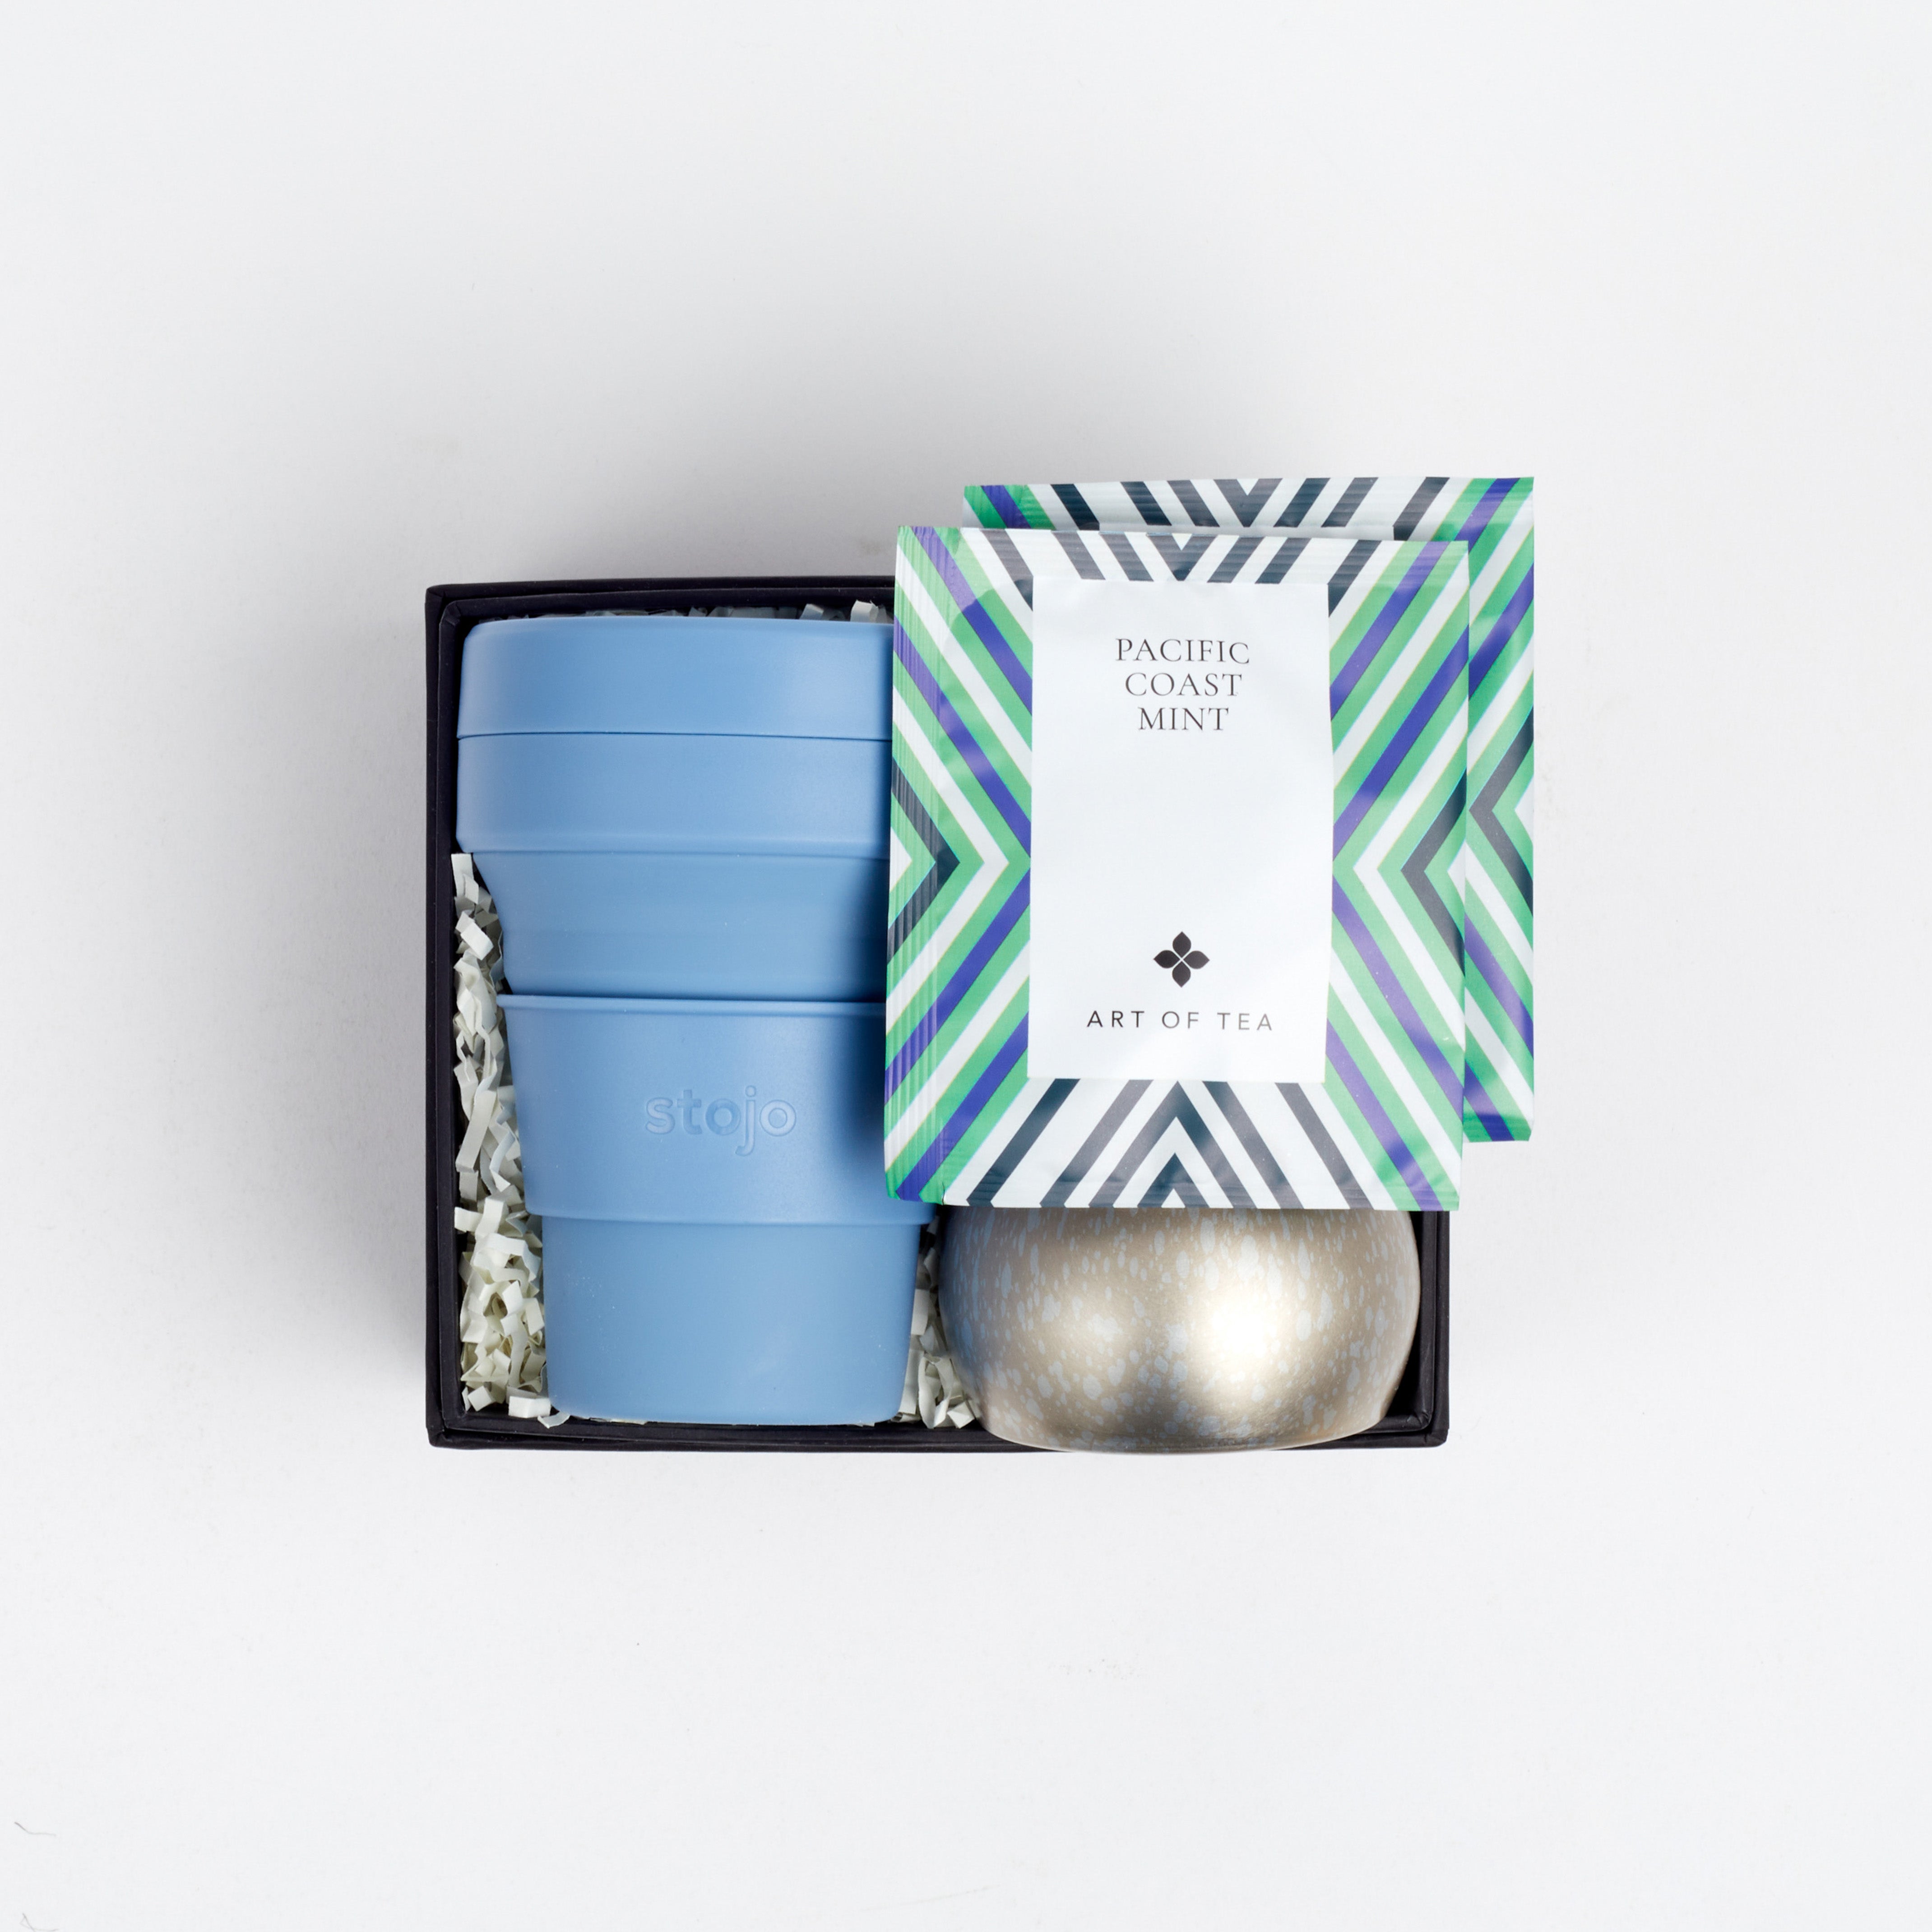 Open BOXFOX box with cup, candle and tea sachets, on white background.